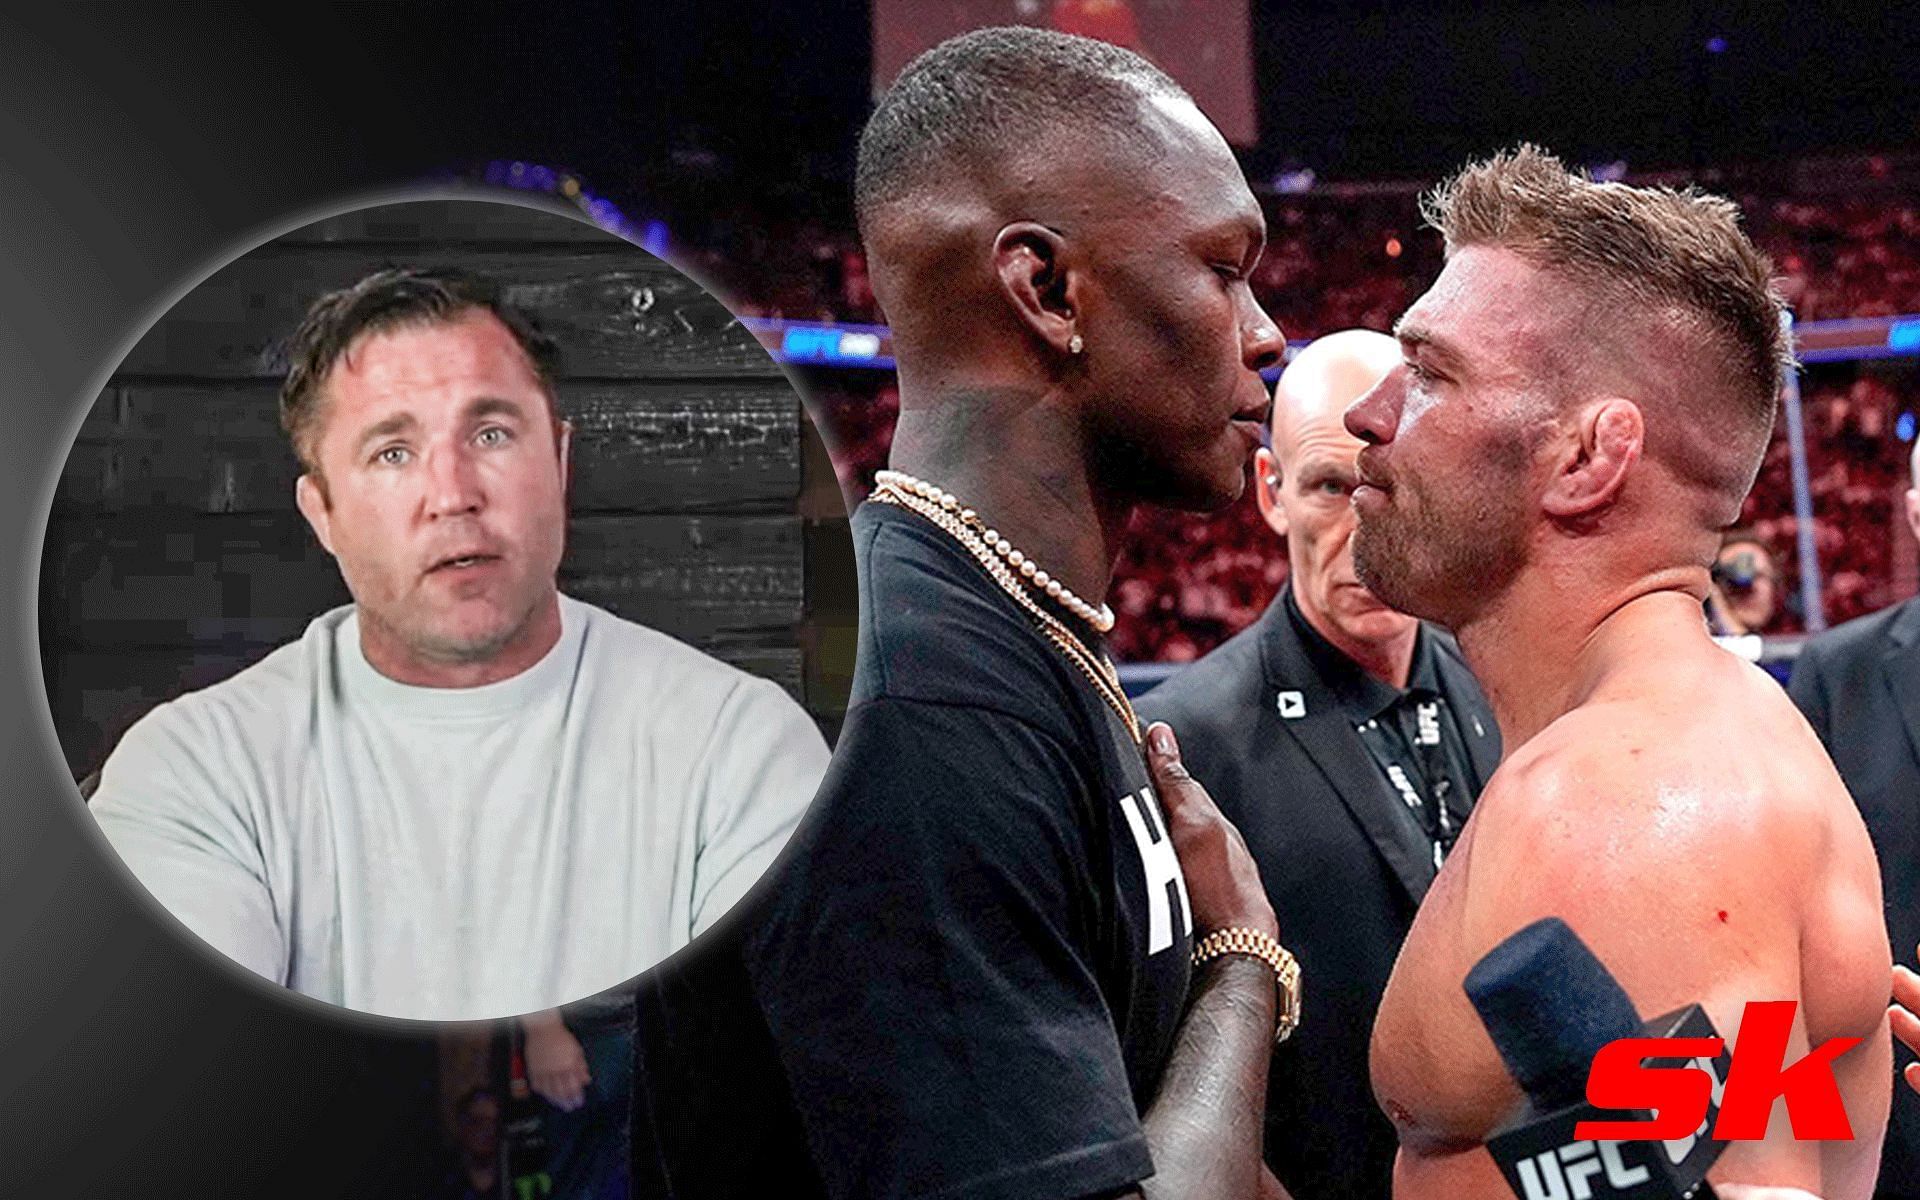 Chael Sonnen (left) [image courtesy of @ChaelSonnenOfficial/YouTube]; Israel Adesanya and Dricus du Plessis (right) [image courtesy of @SportsmanBro/Twitter]